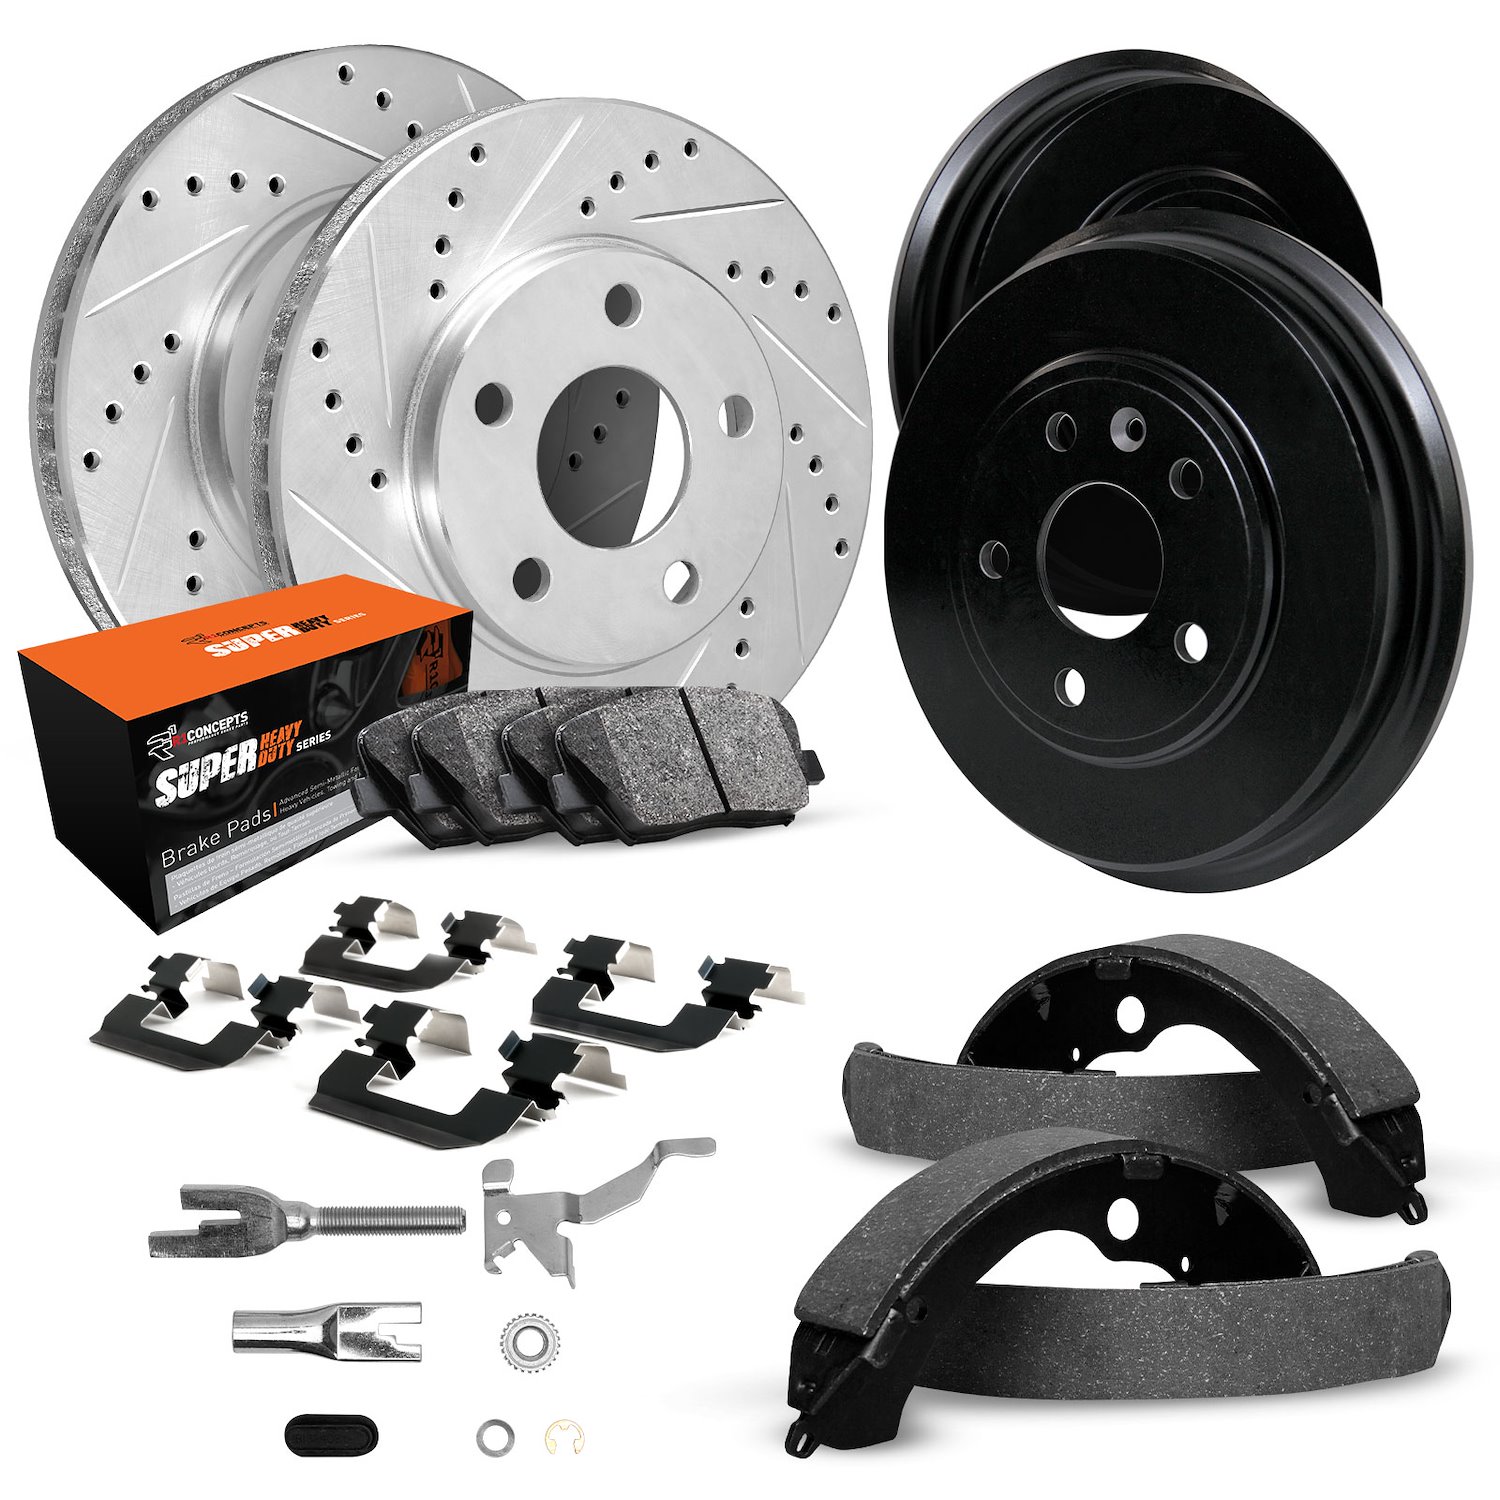 E-Line Drilled/Slotted Silver Rotor & Drum Set w/Super-Duty Pads, Shoes/Hardware/Adjusters, 1994-1994 Ford/Lincoln/Mercury/Mazda